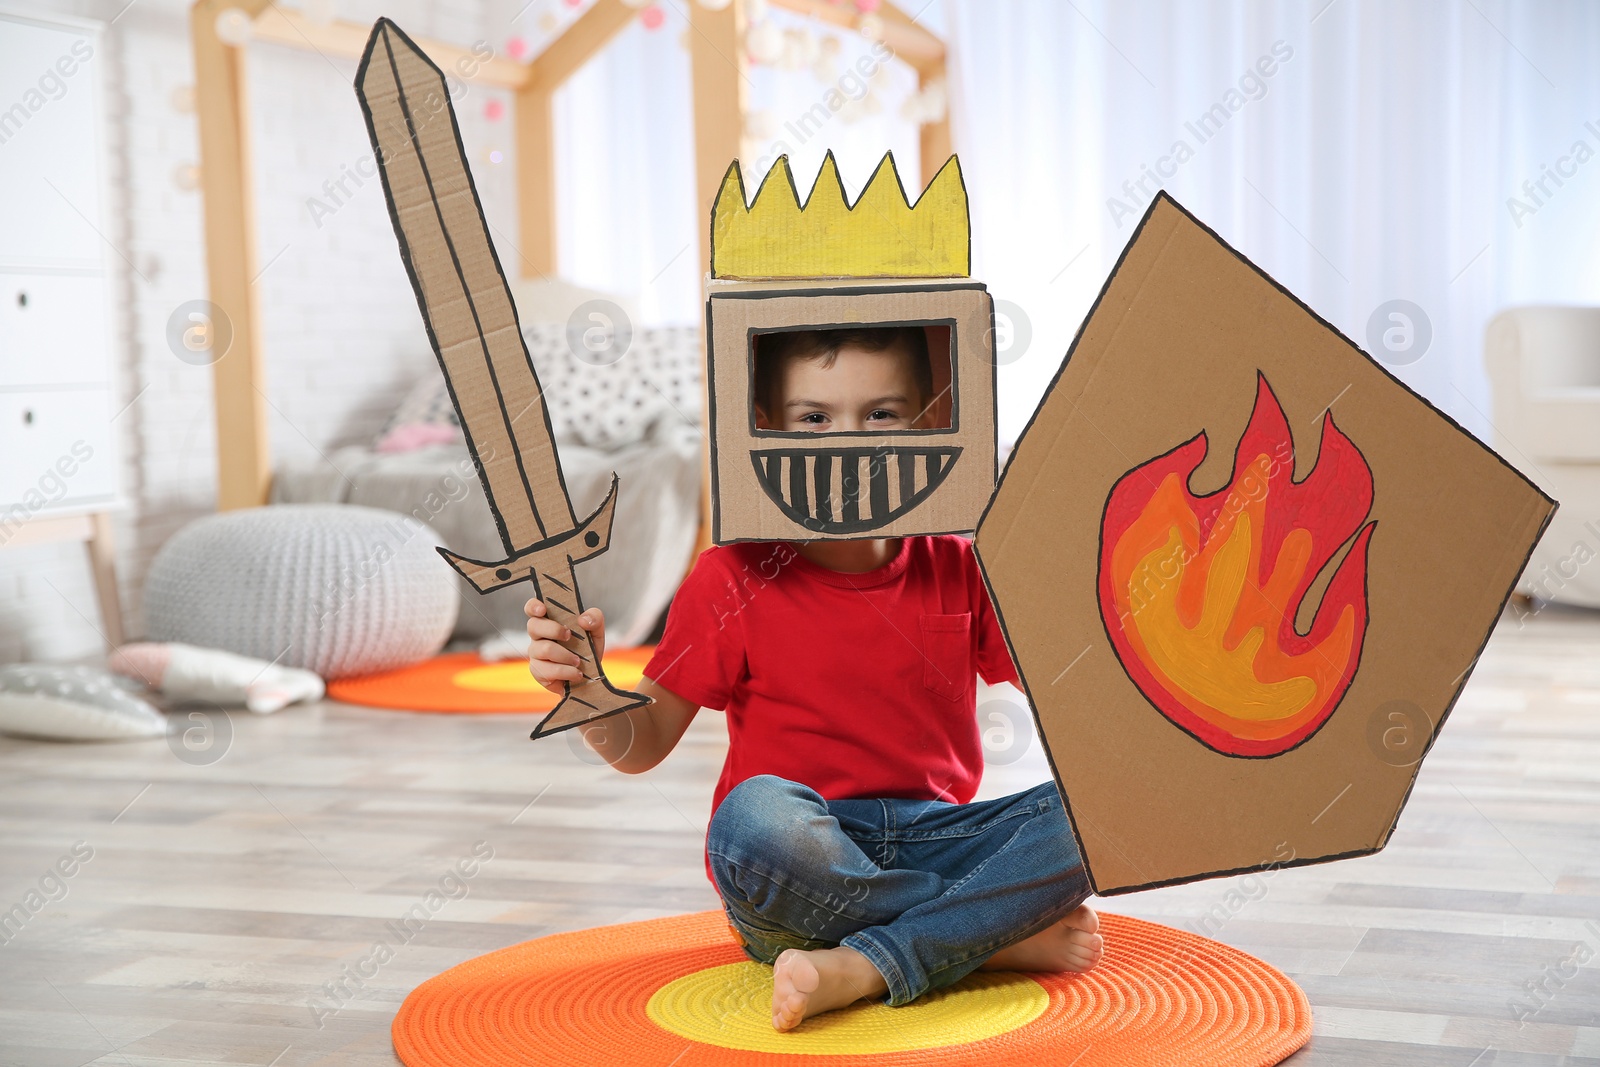 Photo of Cute little boy playing with cardboard armor in bedroom